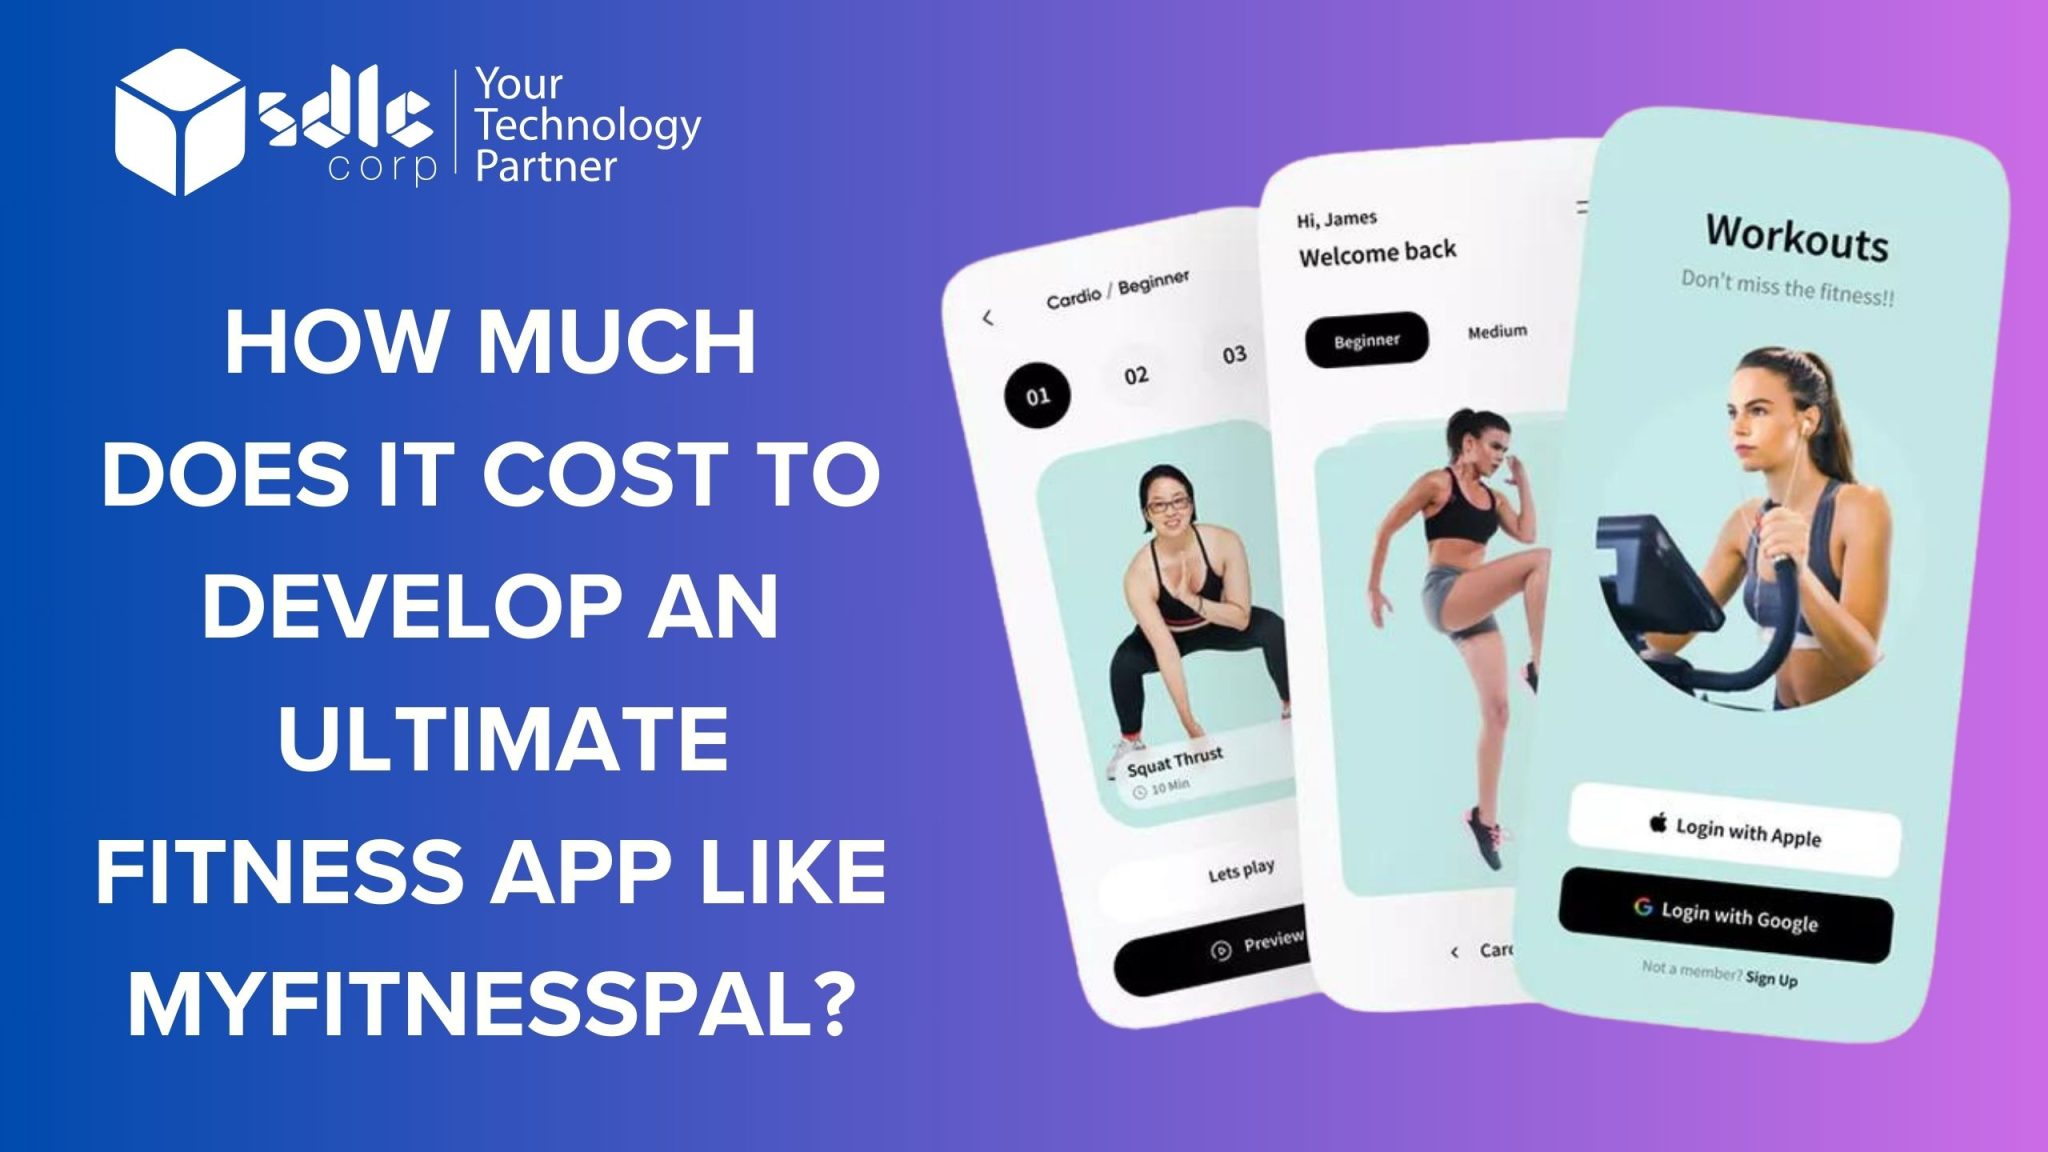 HOW MUCH DOES IT COST TO DEVELOP AN ULTIMATE FITNESS APP LIKE